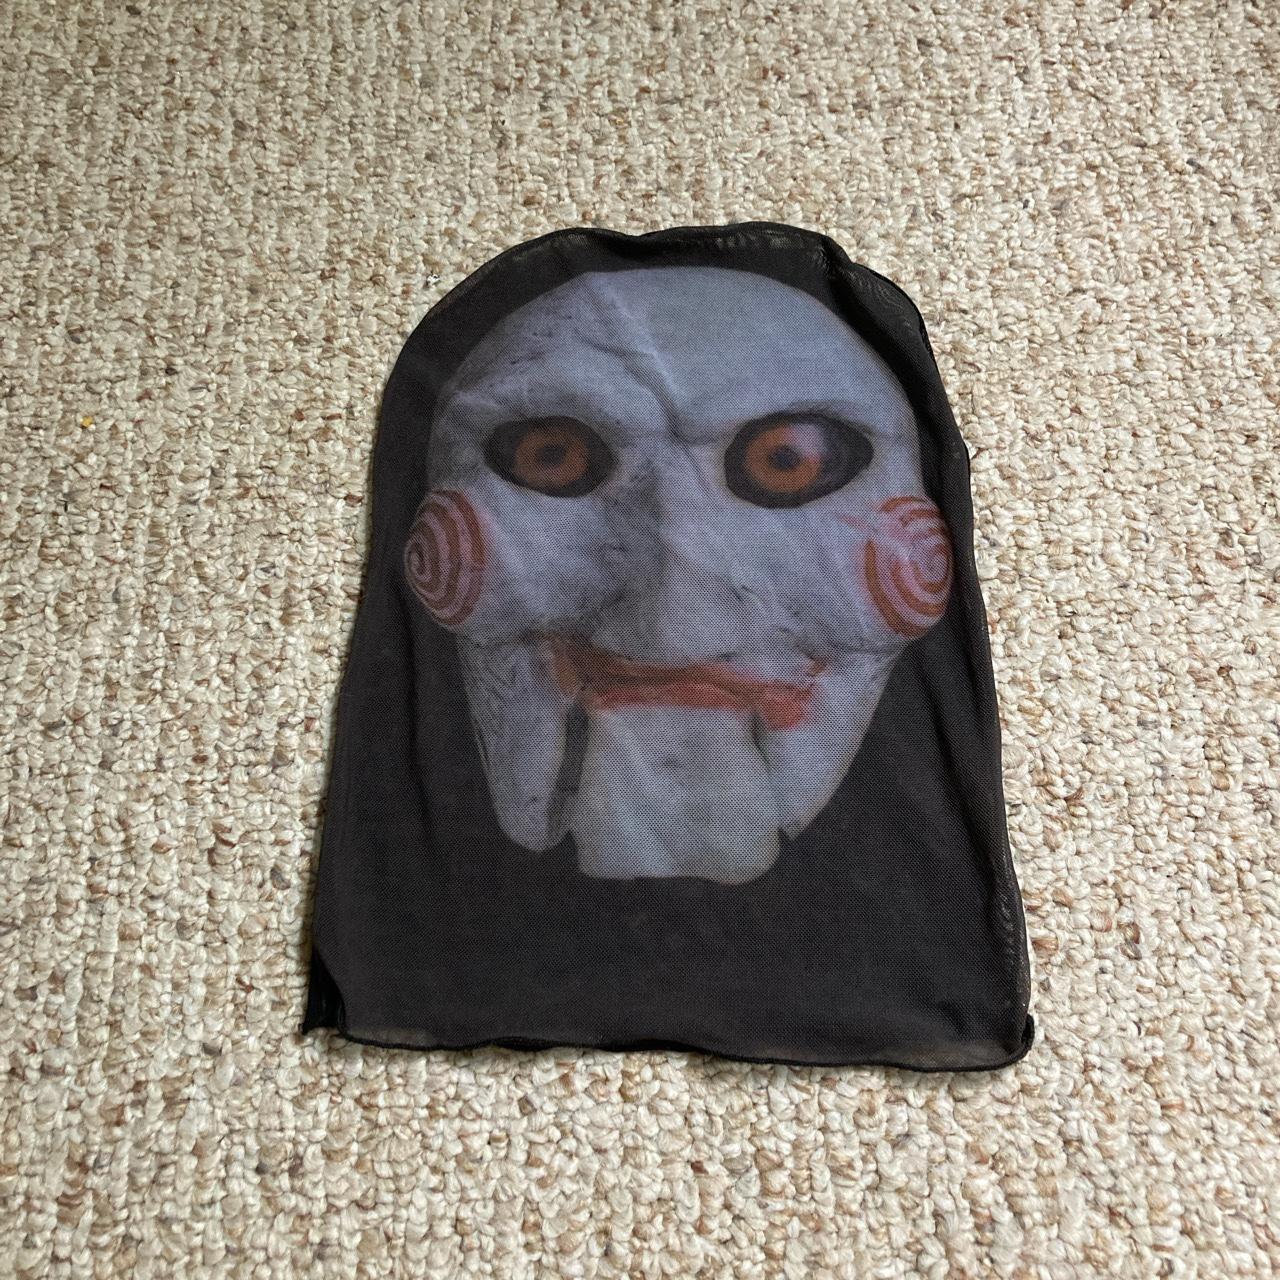 Louise V x Supreme face mask. They don't produce - Depop